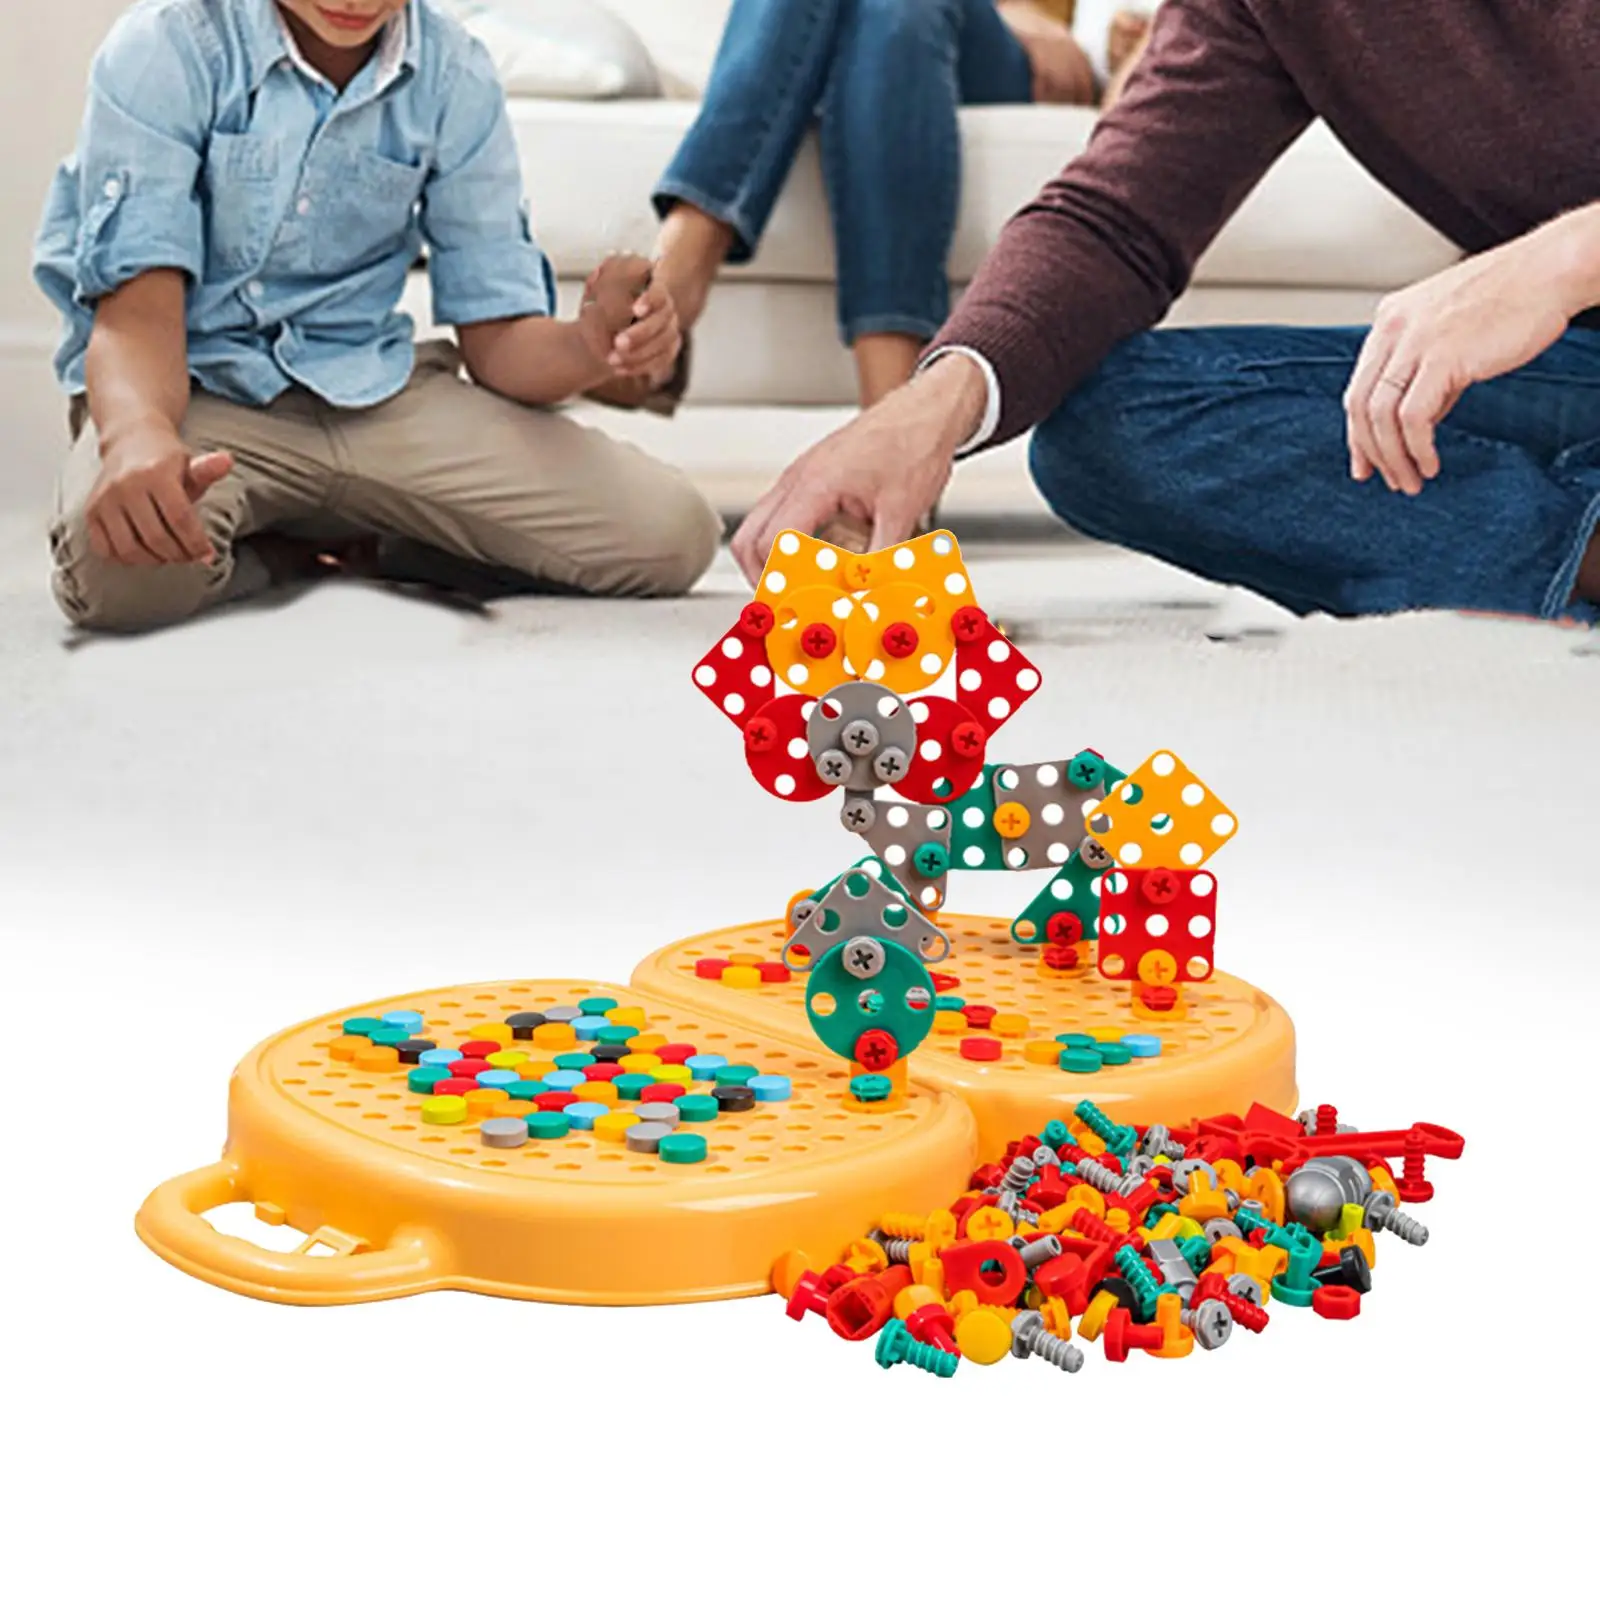 Building Toys Puzzle Toys Building Blocks Games Set Develop Creativity Construction Engineering Learning Toys for Toddler